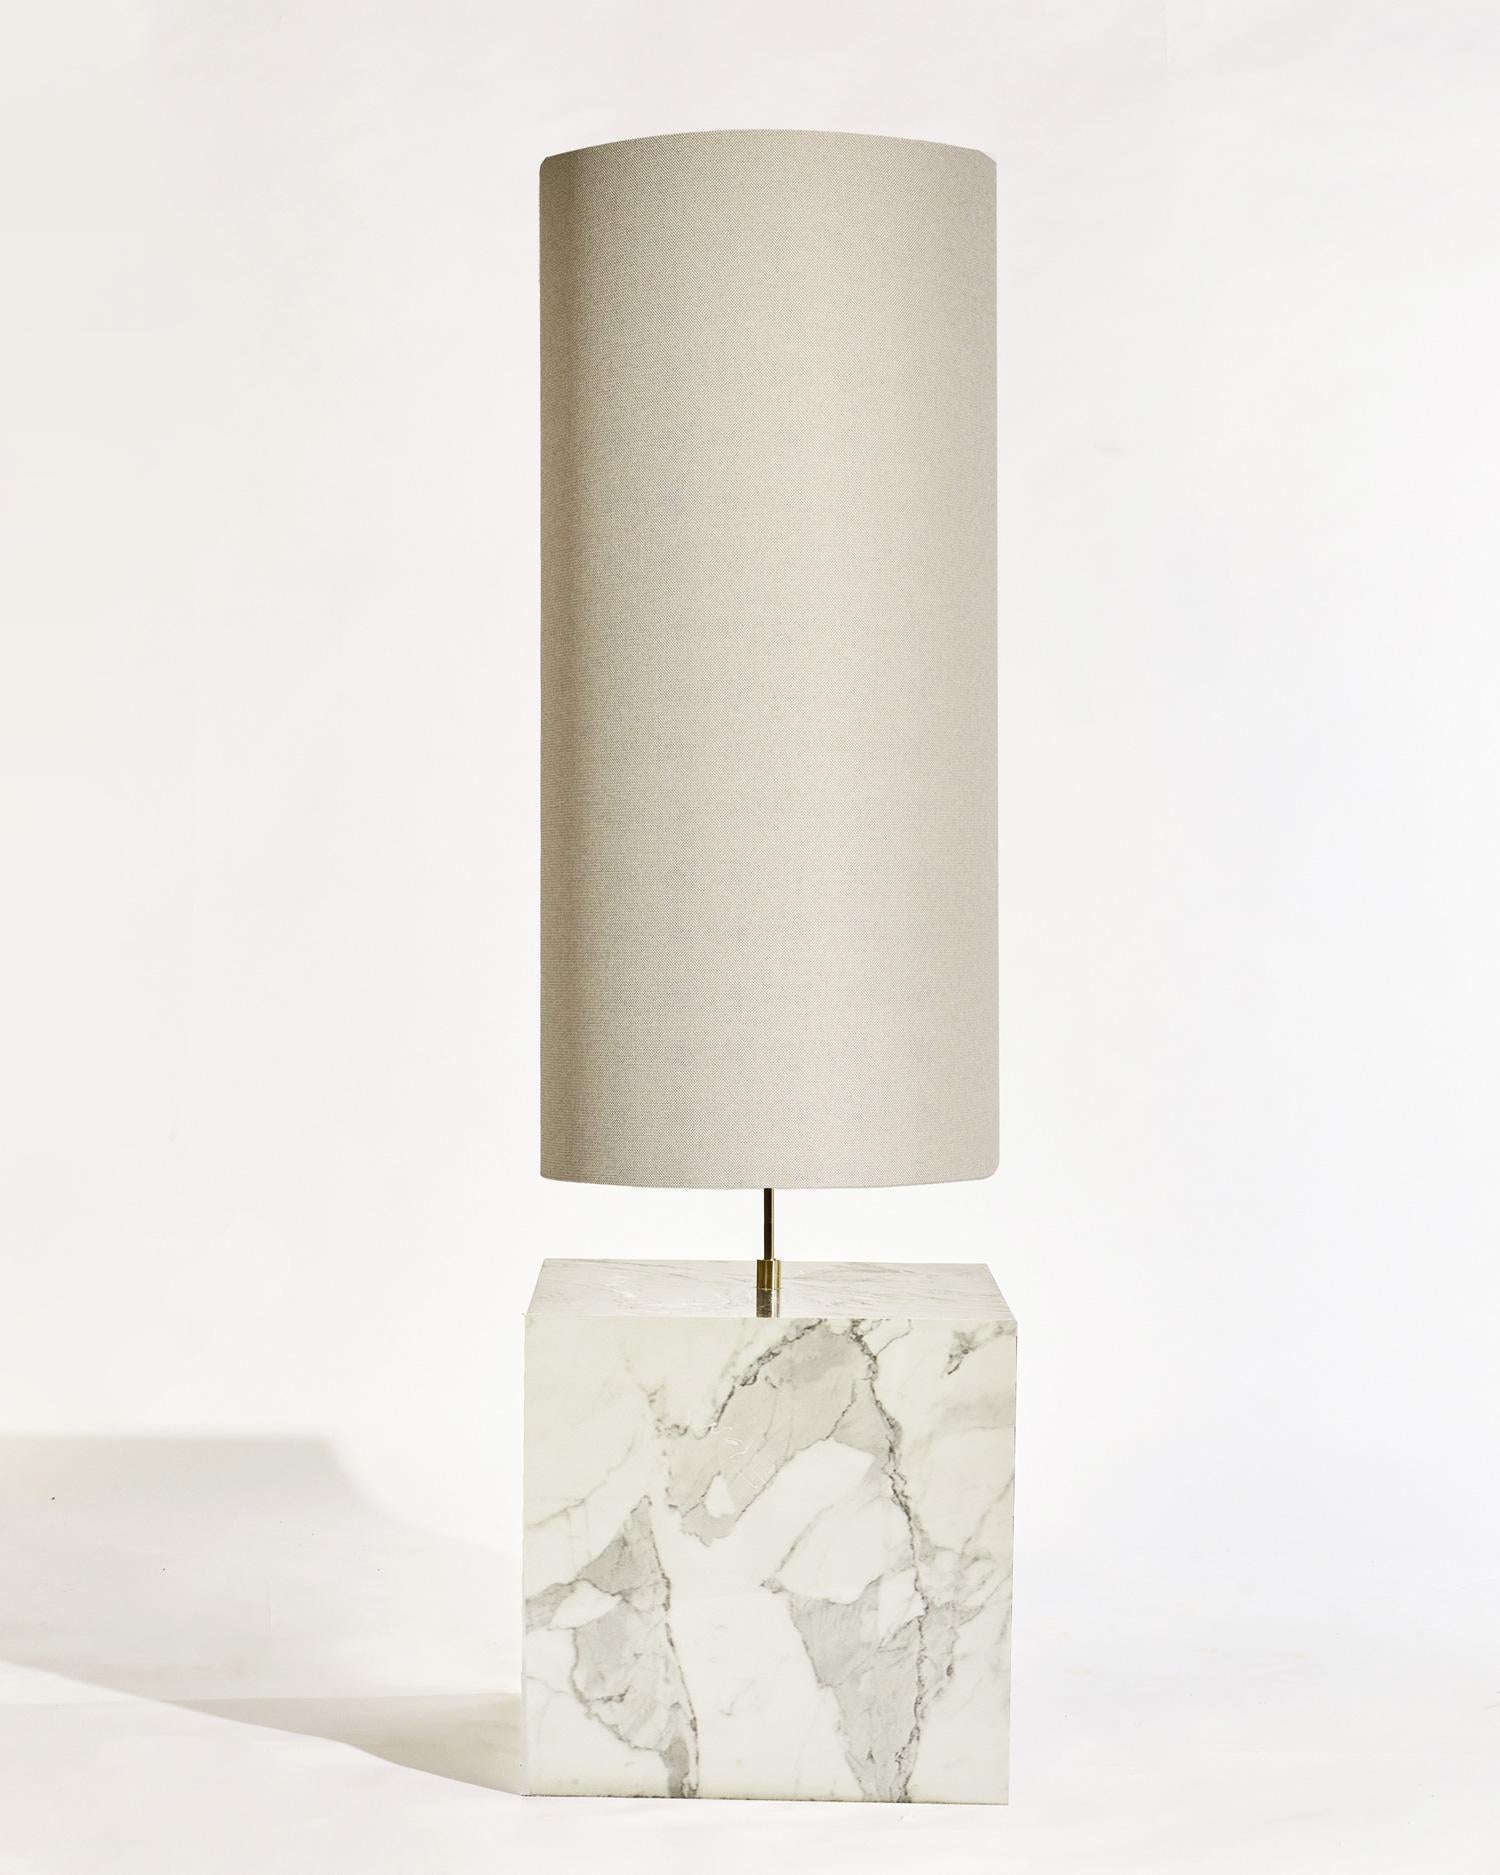 The Coexist Floor Lamp consists of a marble cube base and a lampshade made from recycled fabric.

The lamp serves as a sculptural centerpiece for any room, emitting a soft warm light to draw the viewer into the materials. The bold geometry of the